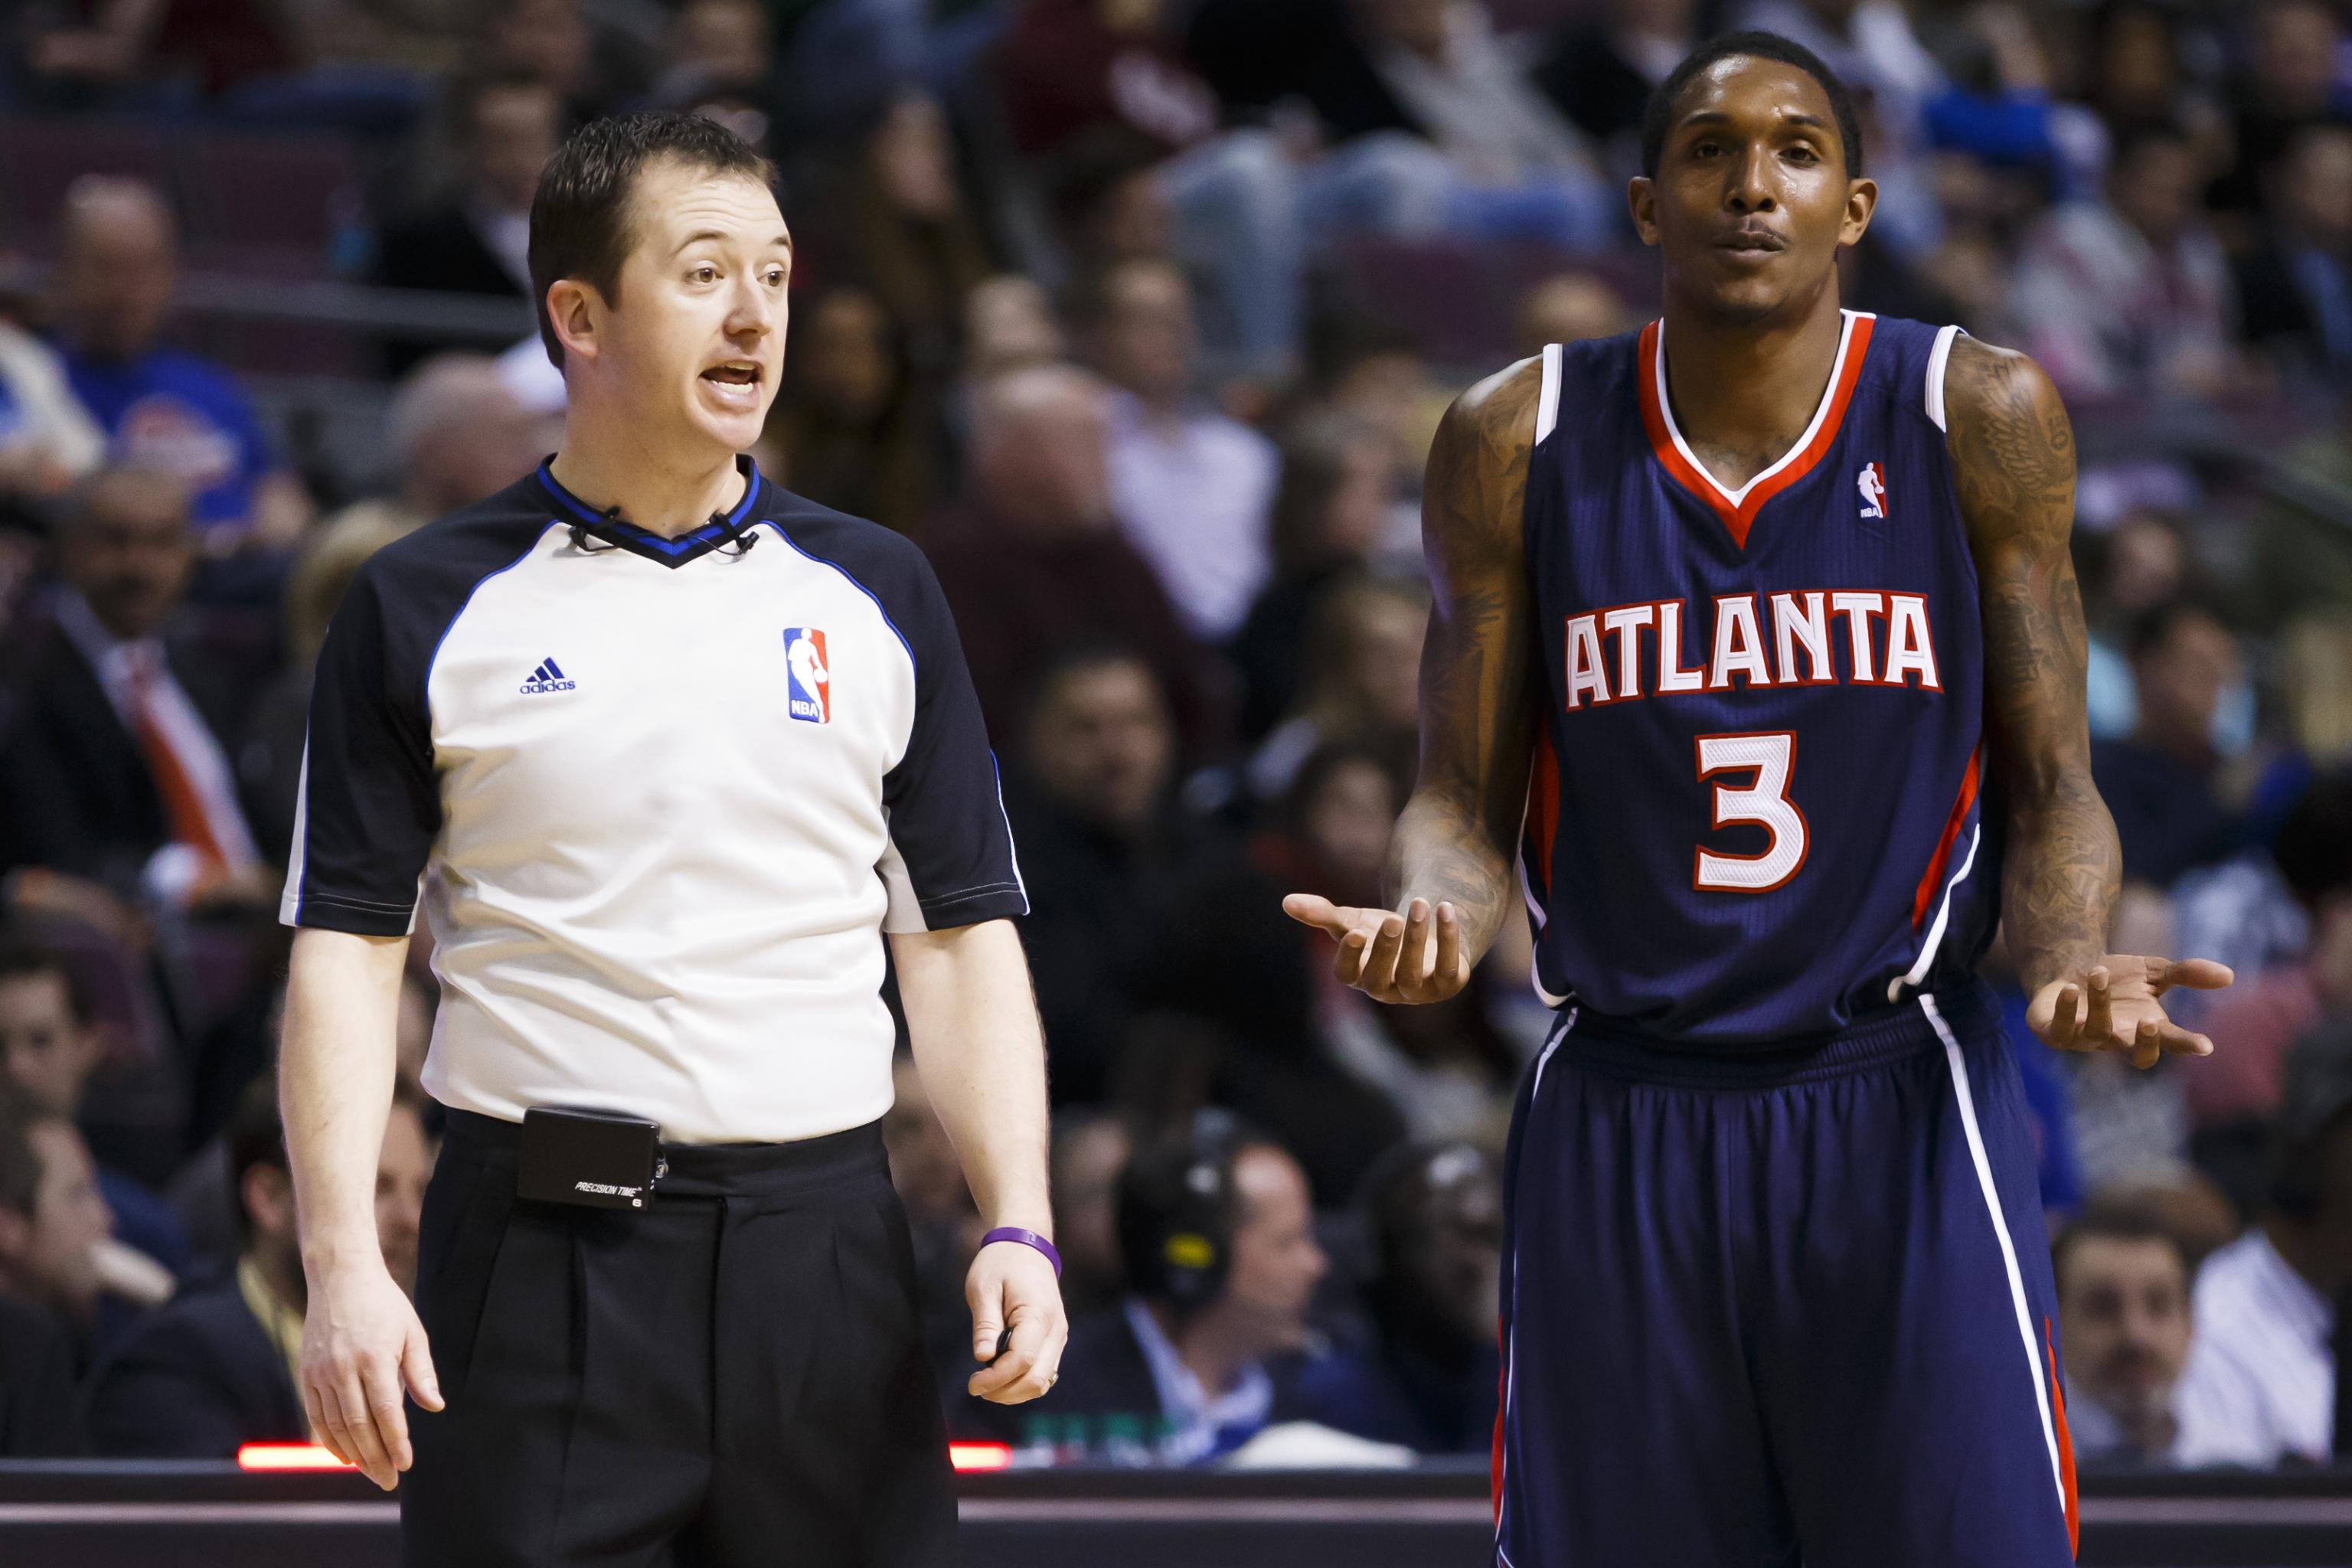 What NBA Referees Can Teach Us About Overcoming Prejudices